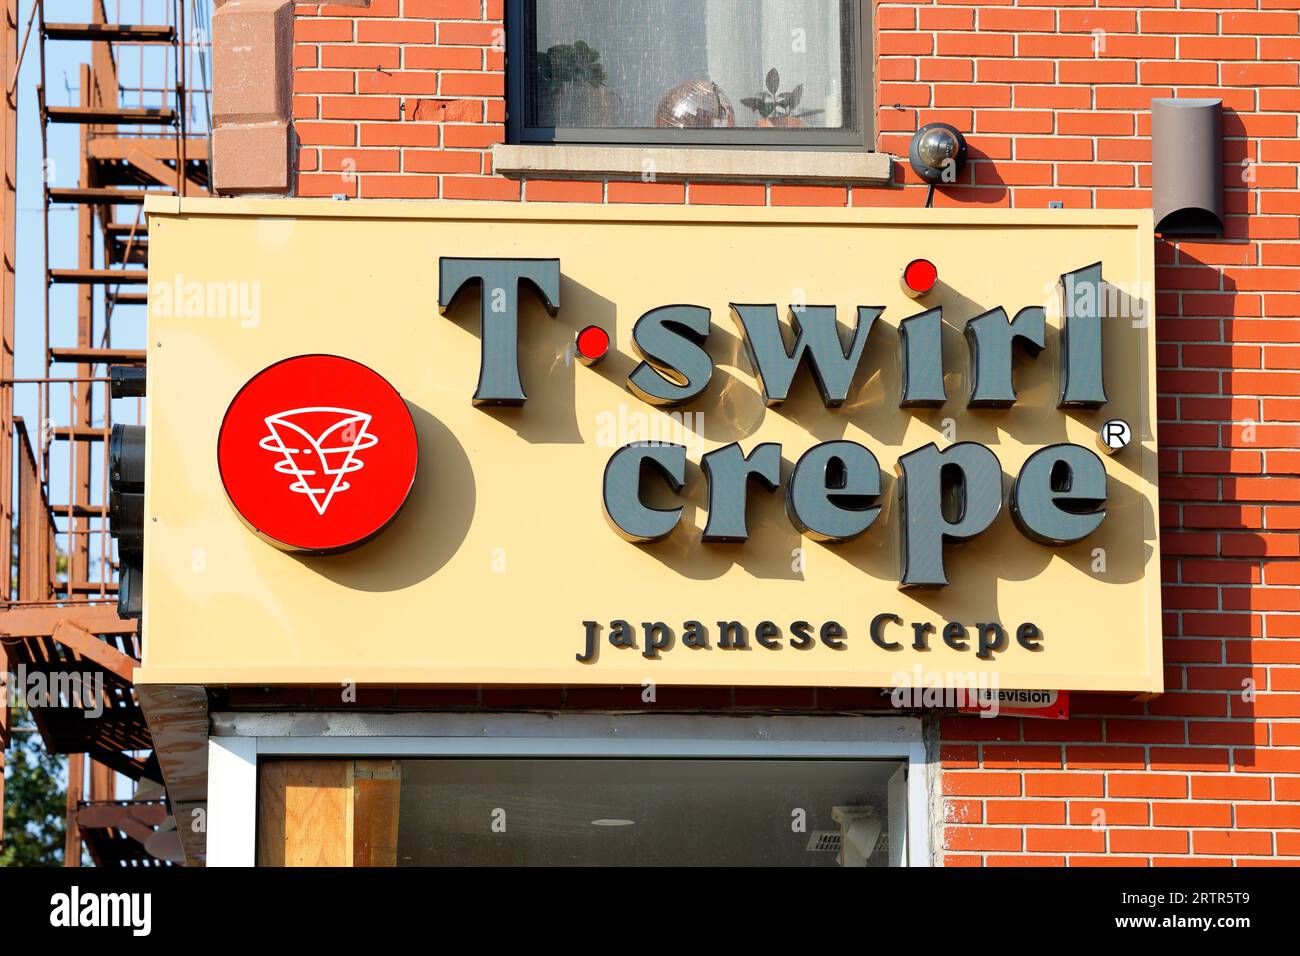 Signage for T Swirl Crepe at a franchise location in Brooklyn, New York City. Stock Photo